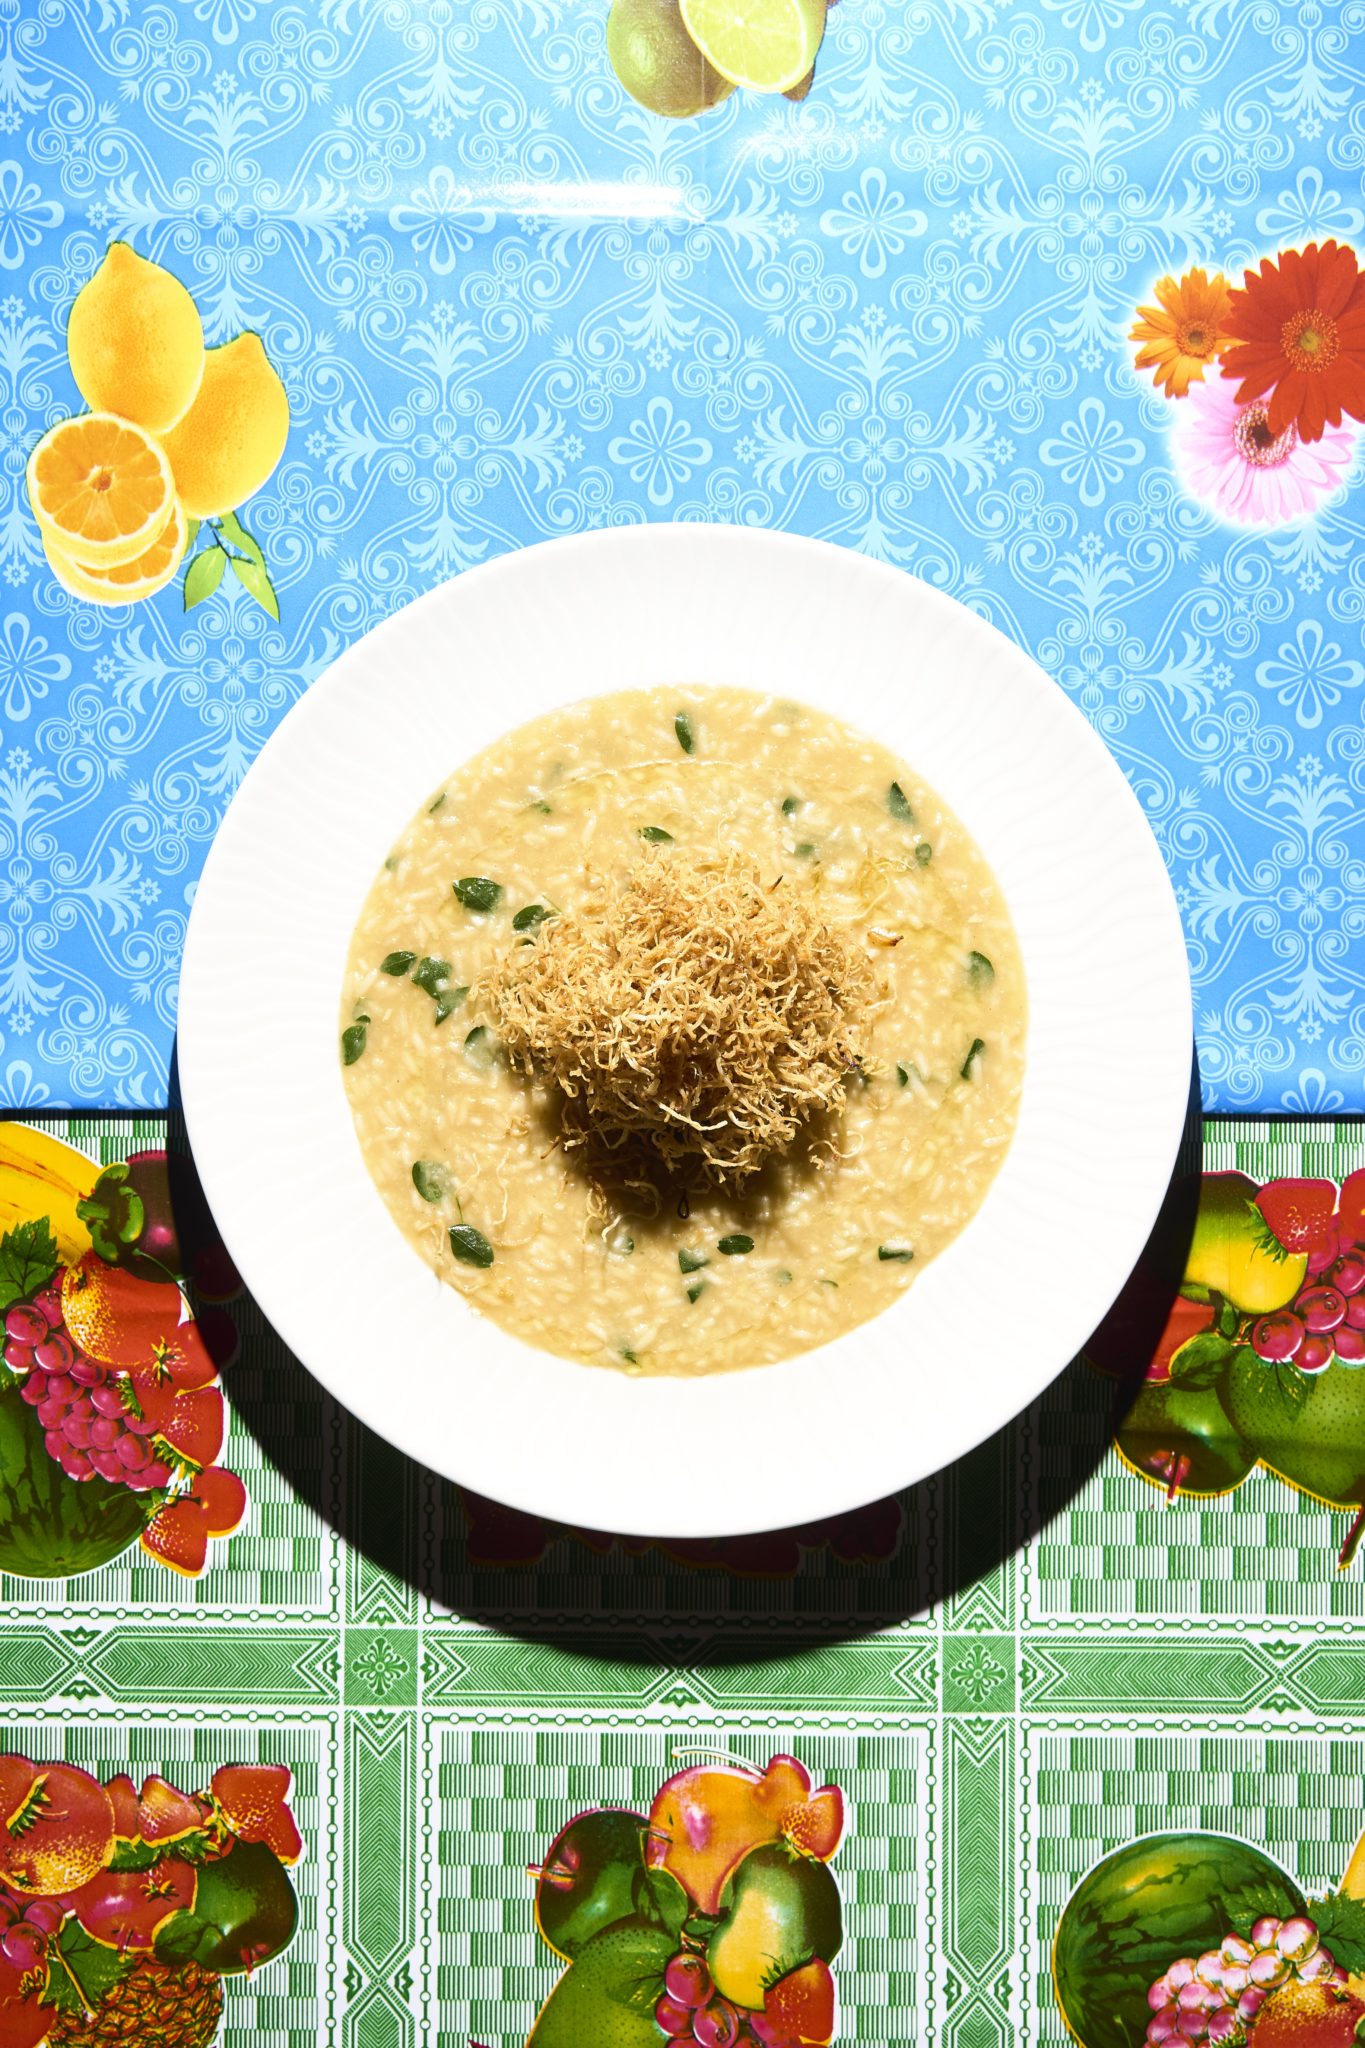 Half Saints' tinola risotto was inspired by her father’s love for tinola and her love for risotto